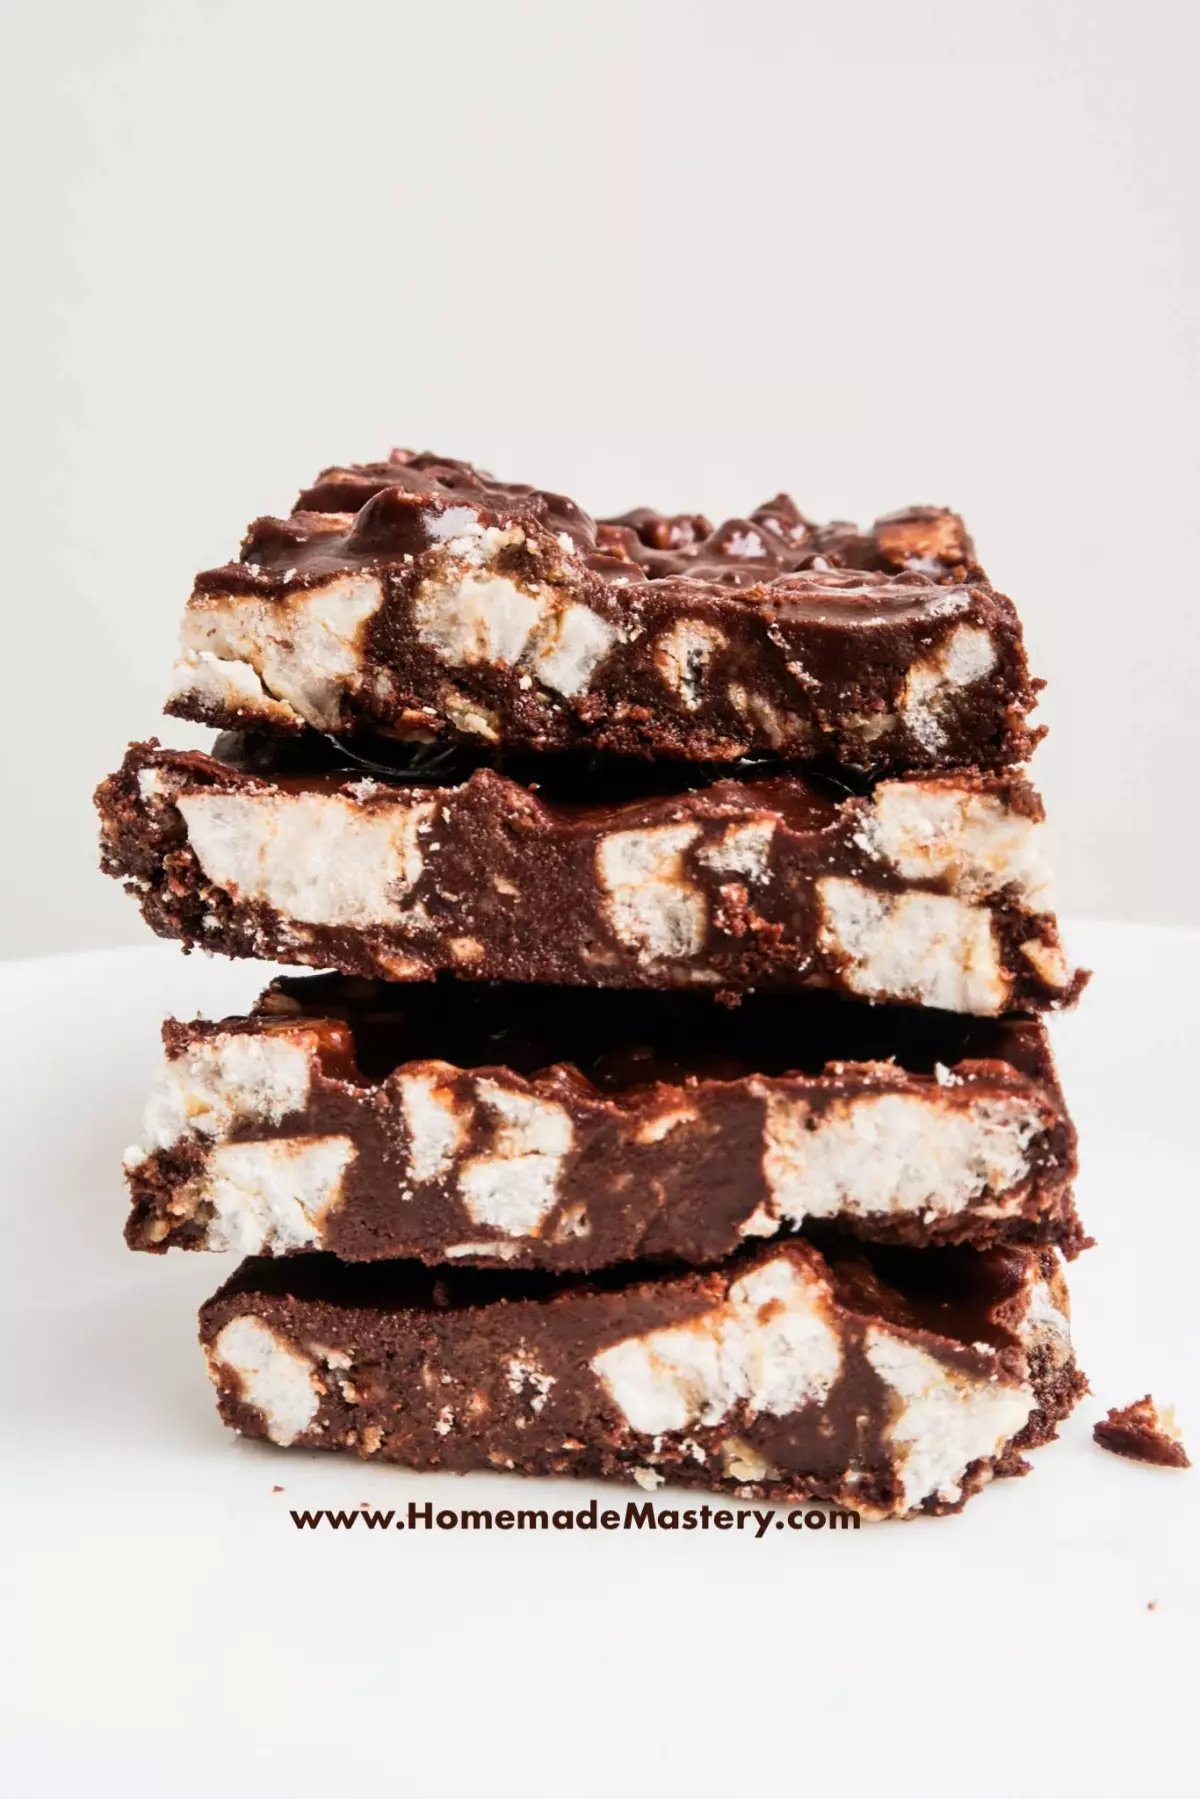 Super easy healthy chocolate rice bars - delicious and only 5 ingredients. These healthy bars are made with peanut butter, rice cakes and dark chocolate and are a great healthy meal prep recipe too! You’ll love these when you have chocolate craving - they’re a great healthy dessert and so easy to make.